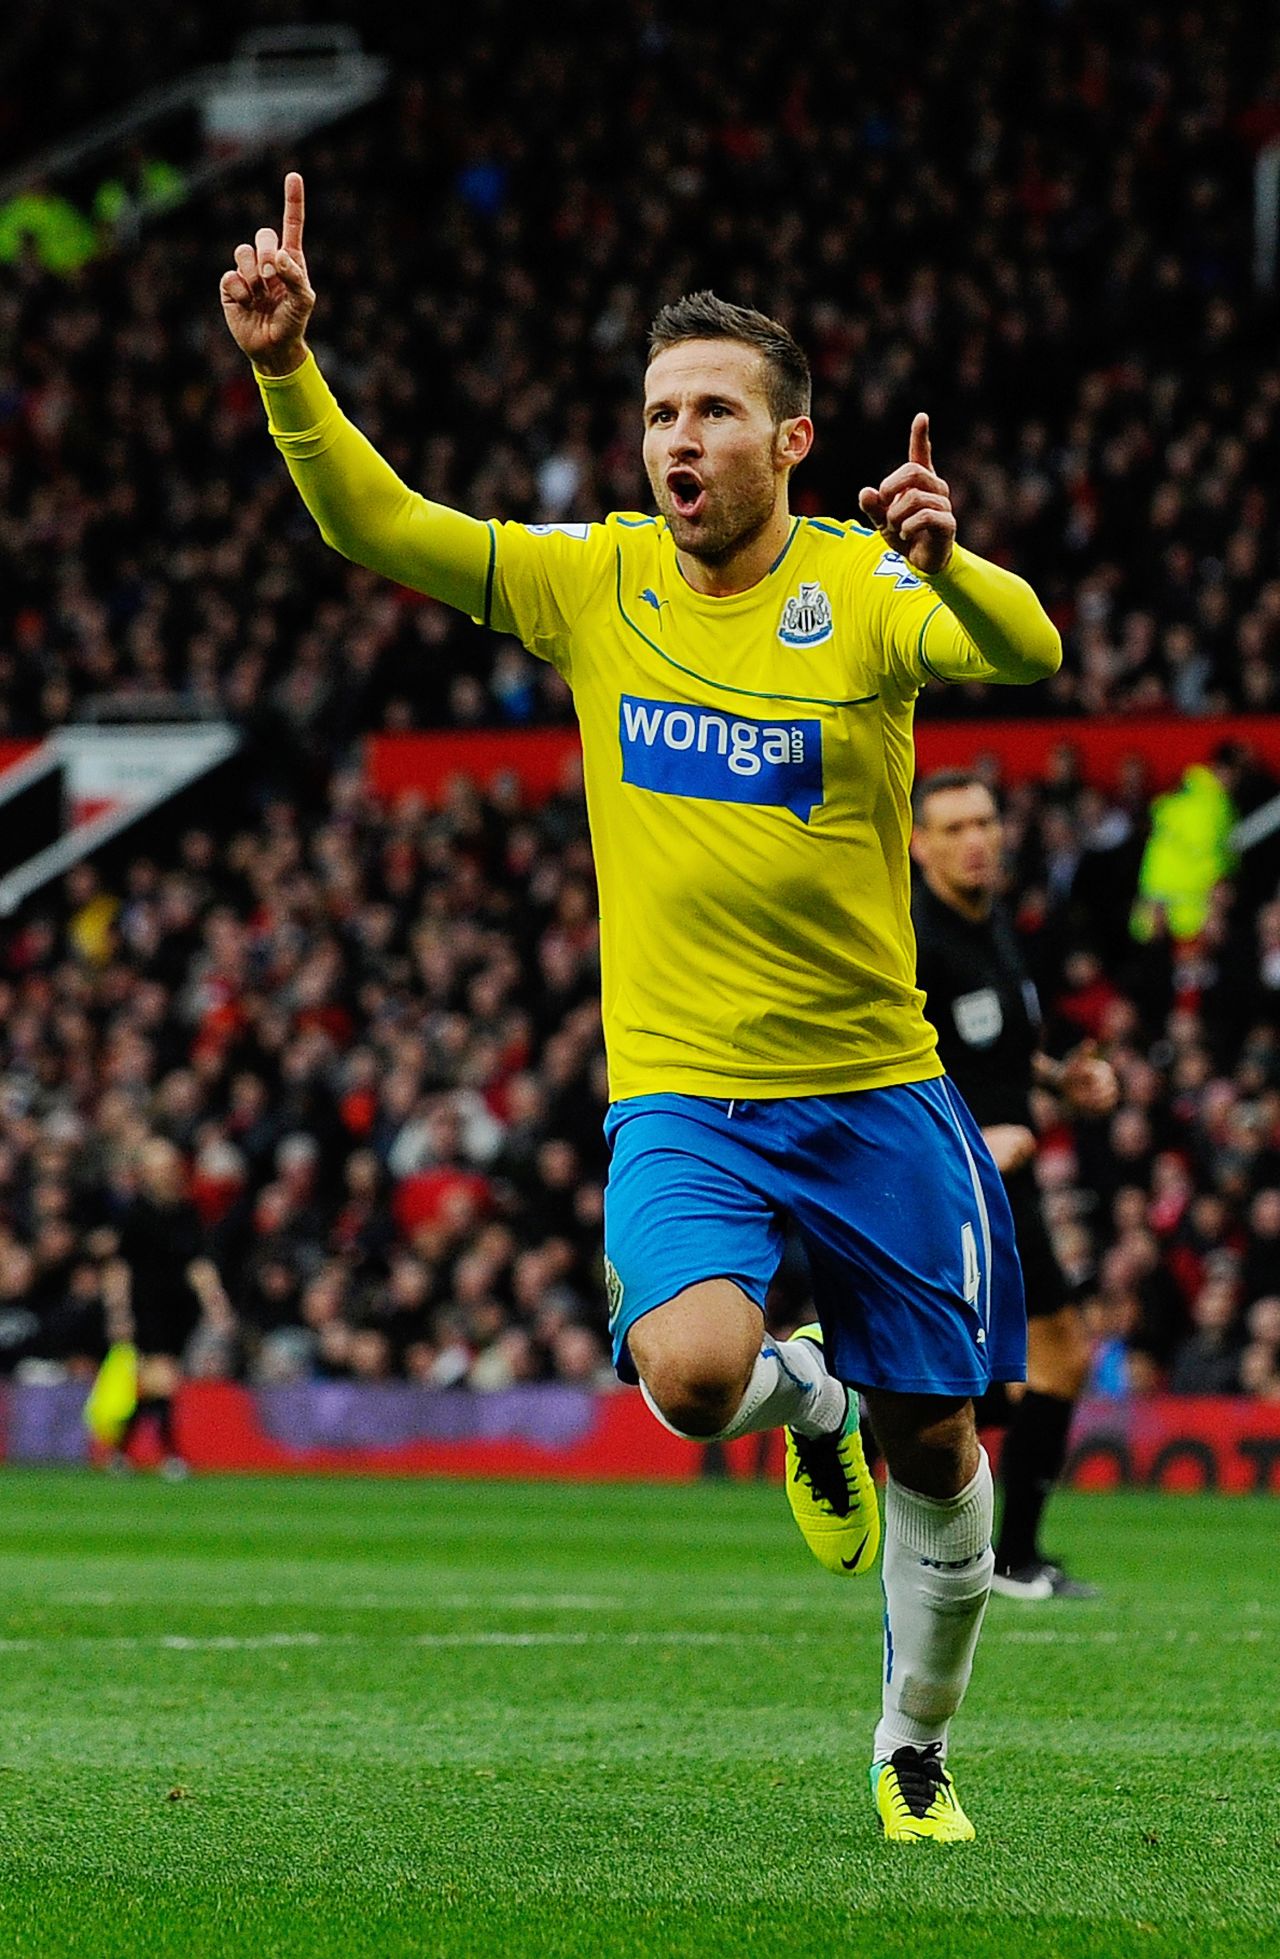 Newcastle's policy of recruitment is to purchase preferably young foreign talent with sell-on potential. A case in point is Yohan Cabaye, who was bought in 2011 for a reported $6.3 million and sold to Paris Saint-Germain in January 2014 for $28m. He wasn't replaced and the club won just four of its next 16 matches.